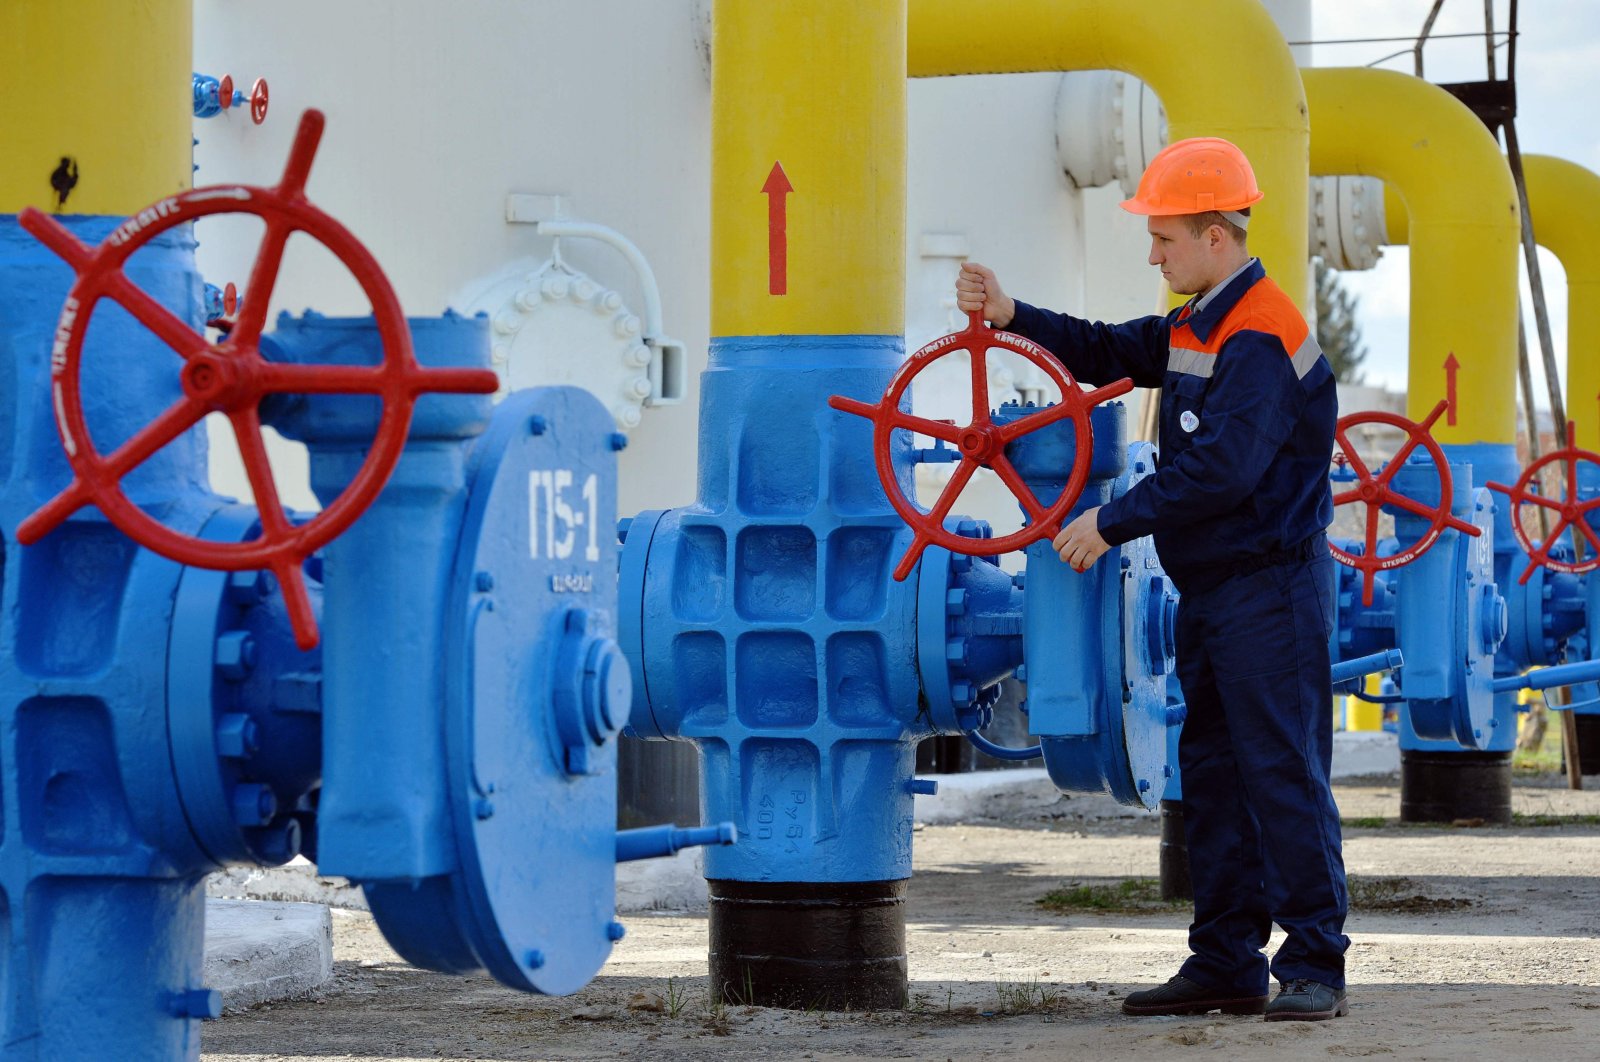 An employee turning a valve of a gas installation during a training exercise for handling emergencies at a gas-pumping station on the gas pipeline in the small town Boyarka in the Kyiv region, Ukraine, April 22, 2015. (AFP Photo)